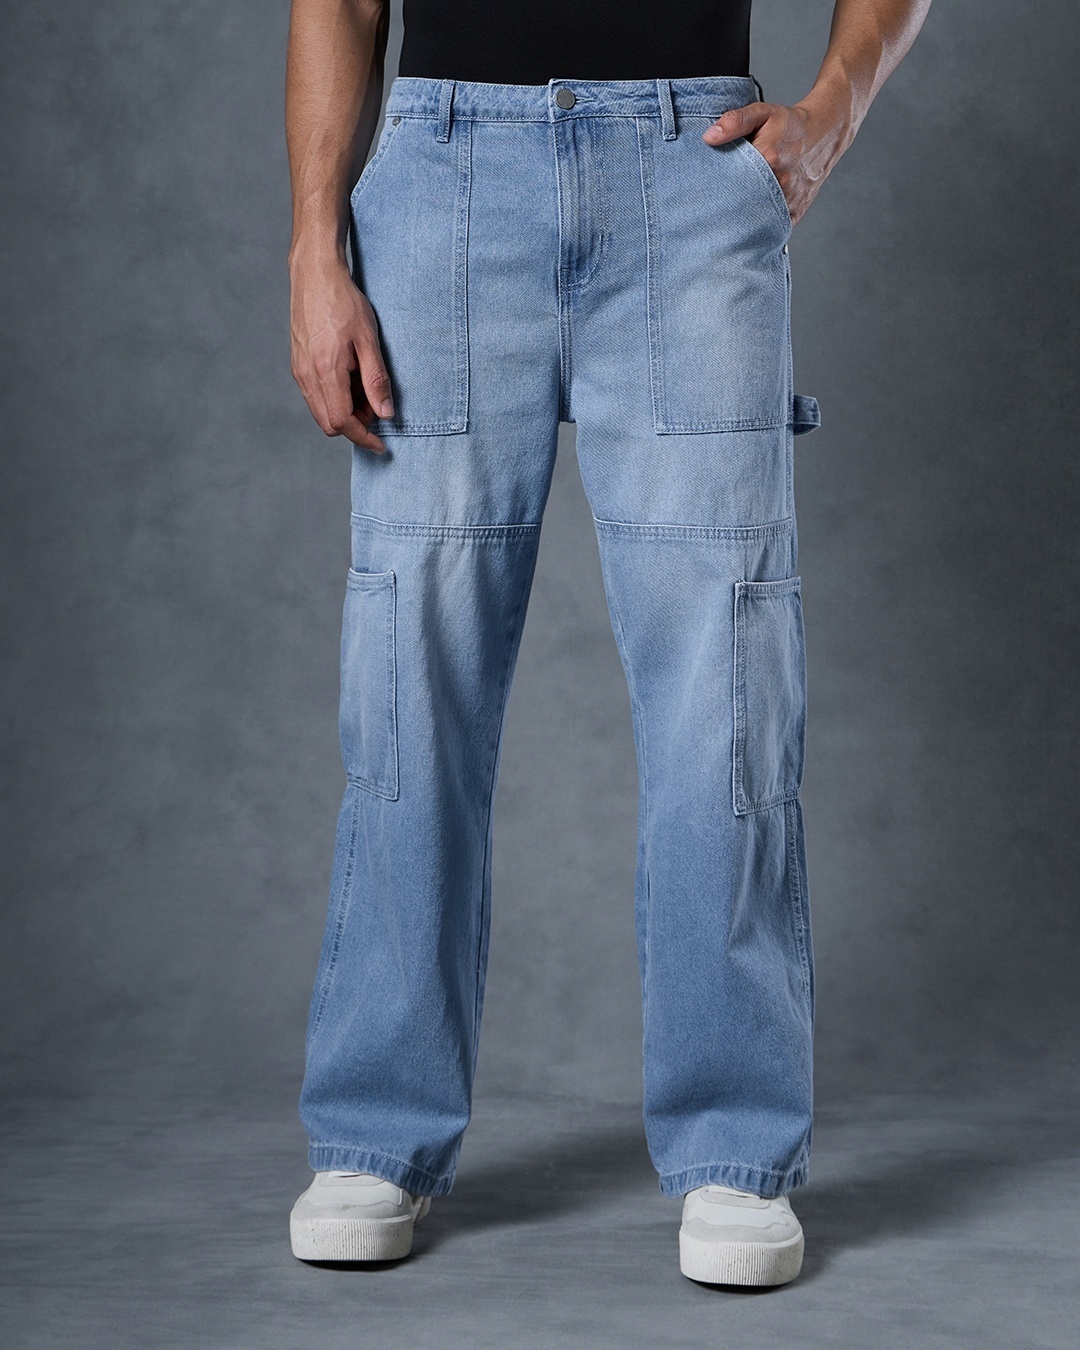 model with Short Height wearing jeans